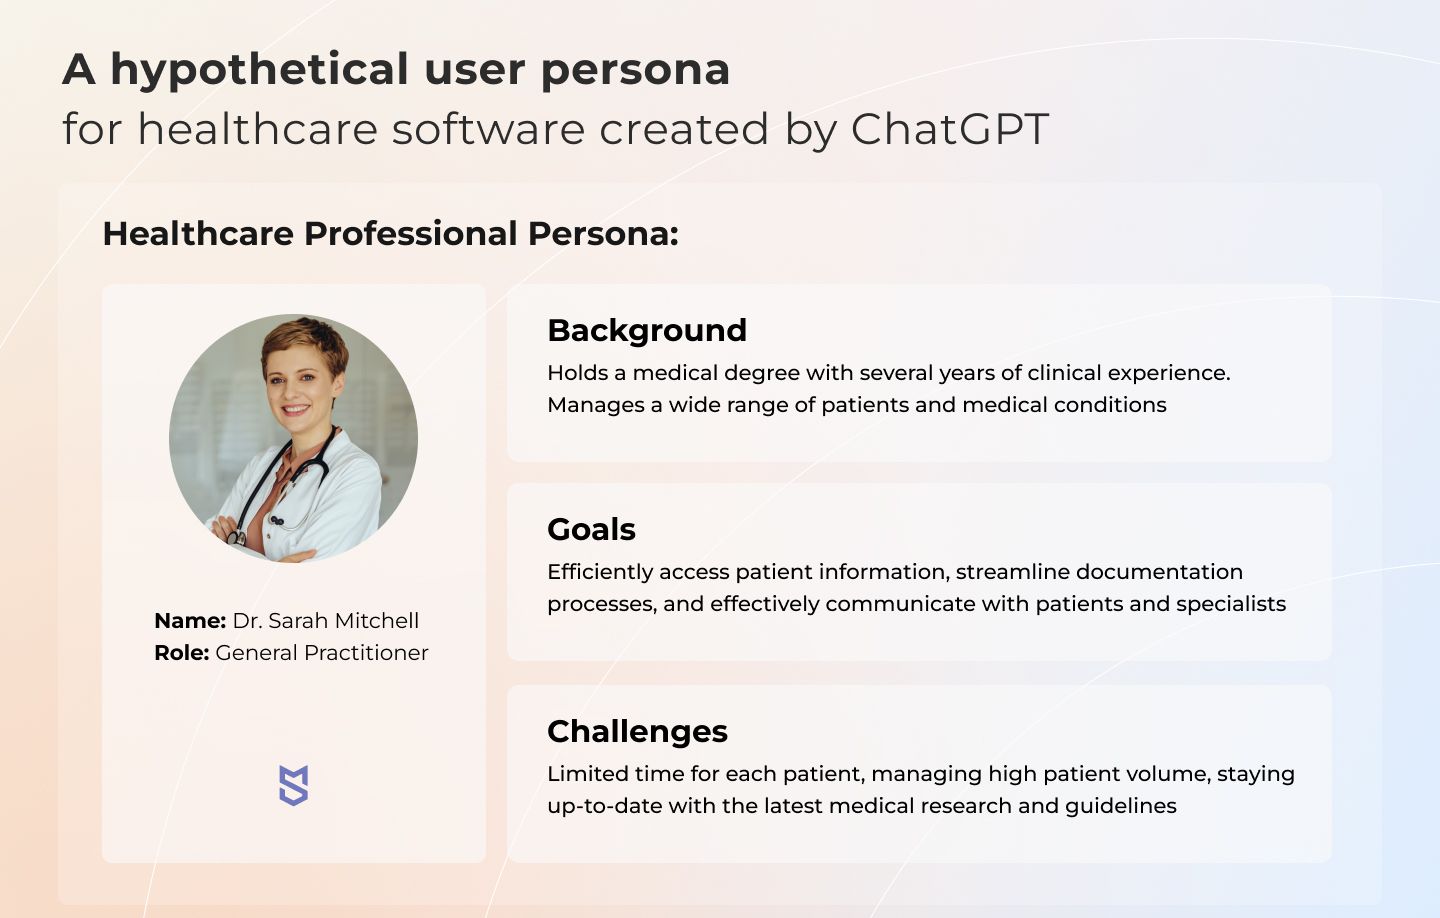 A hypothetical user persona for healthcare software created by ChatGPT